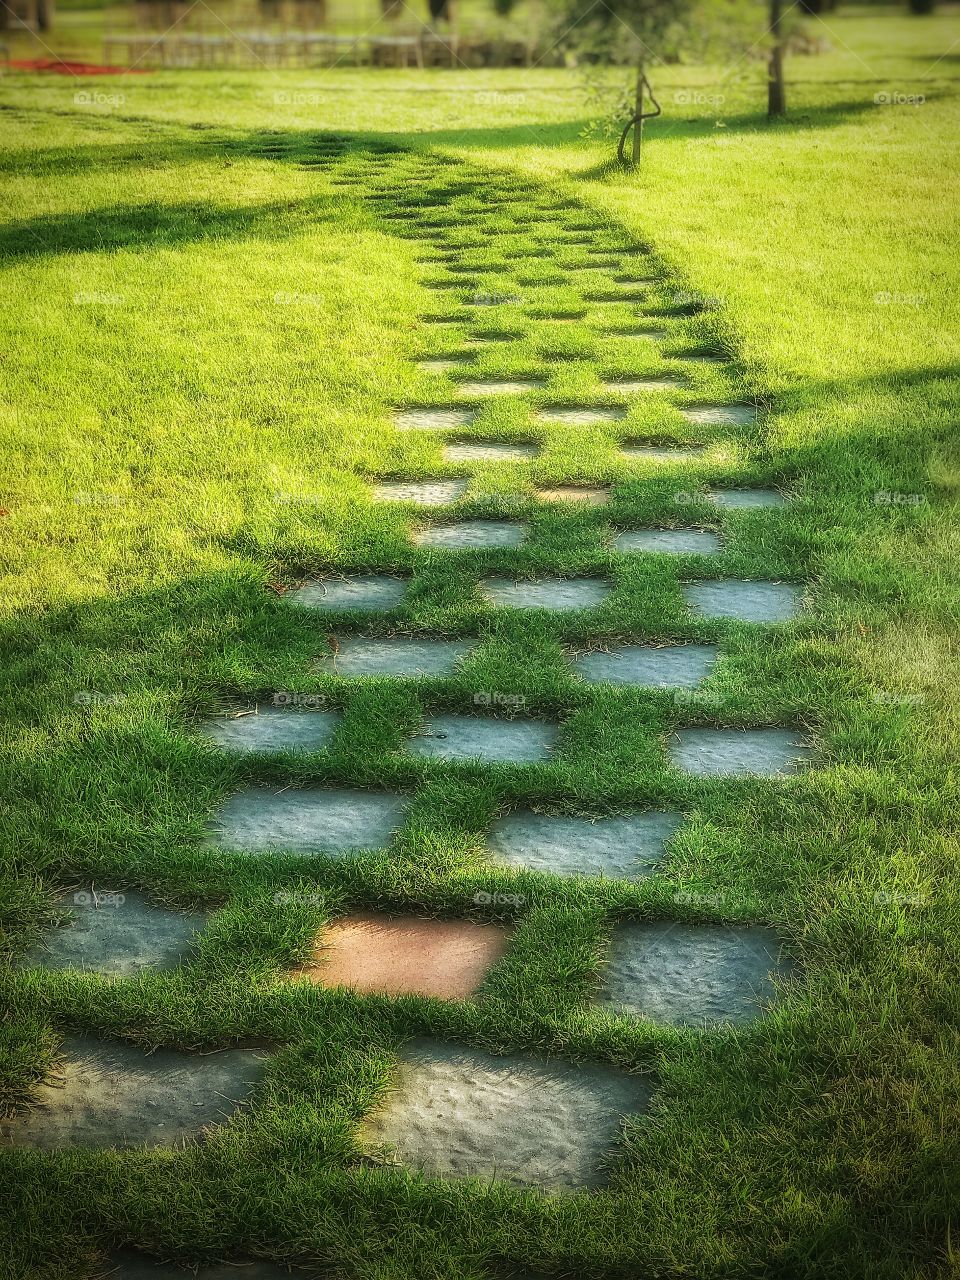 A perfect path through a natural green carpet; just to follow your way and go for your dreams! Enjoy.